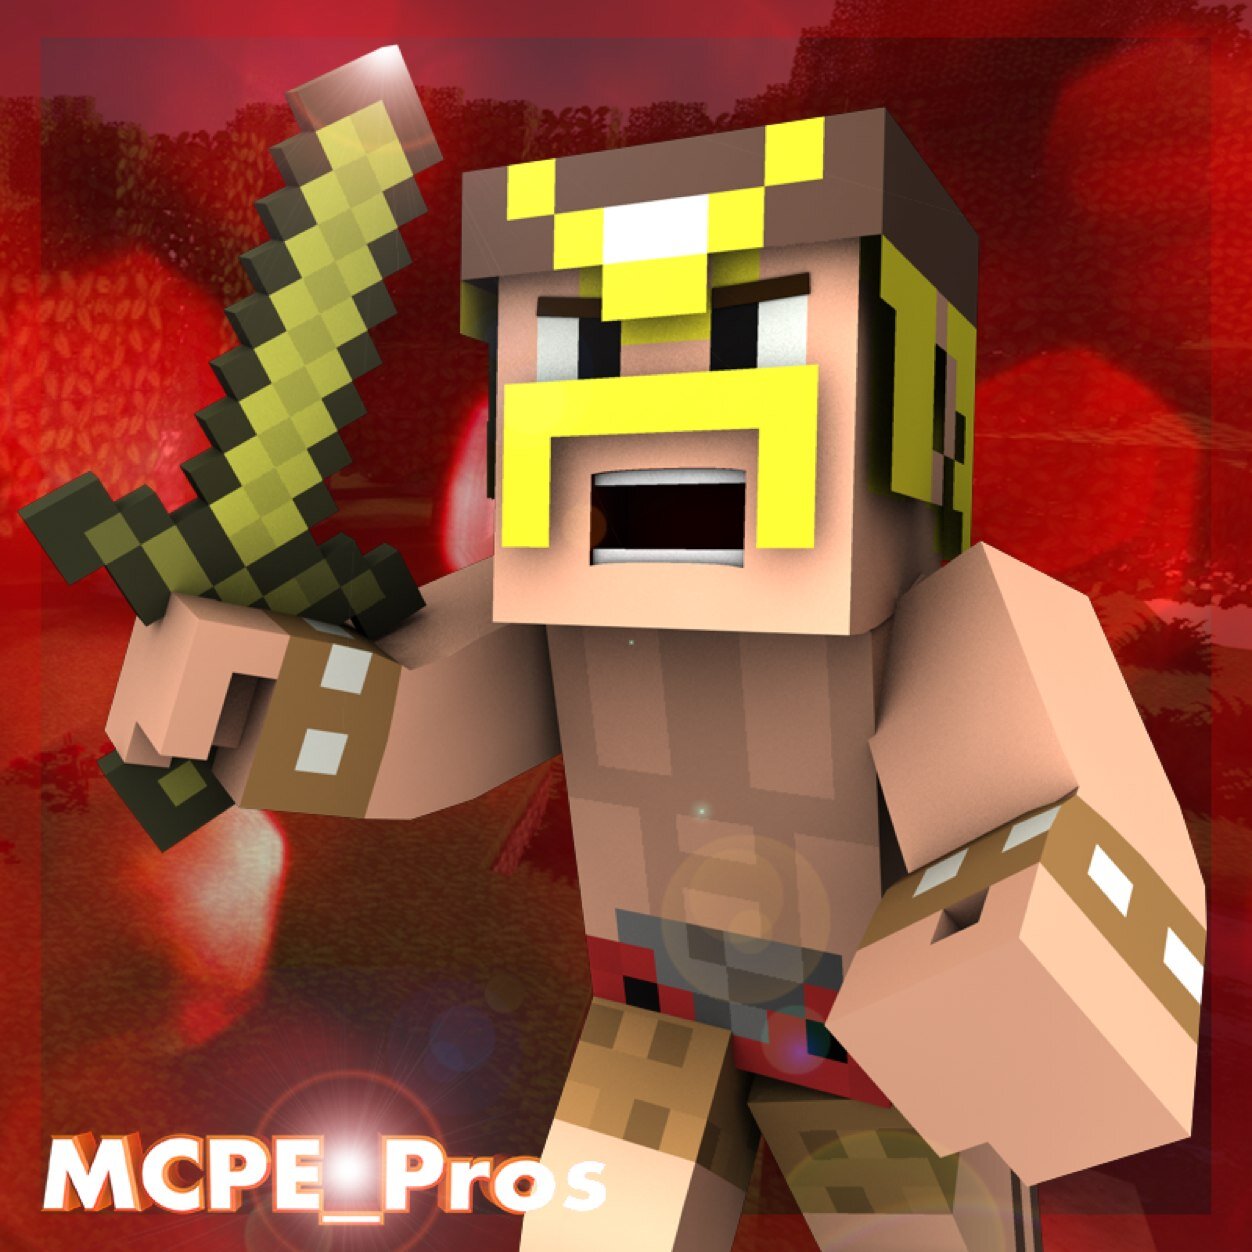 Welcome! This Is The Official Account Of The Clash Of Clans Clan, MCPE_Pros! Join Our Clan!